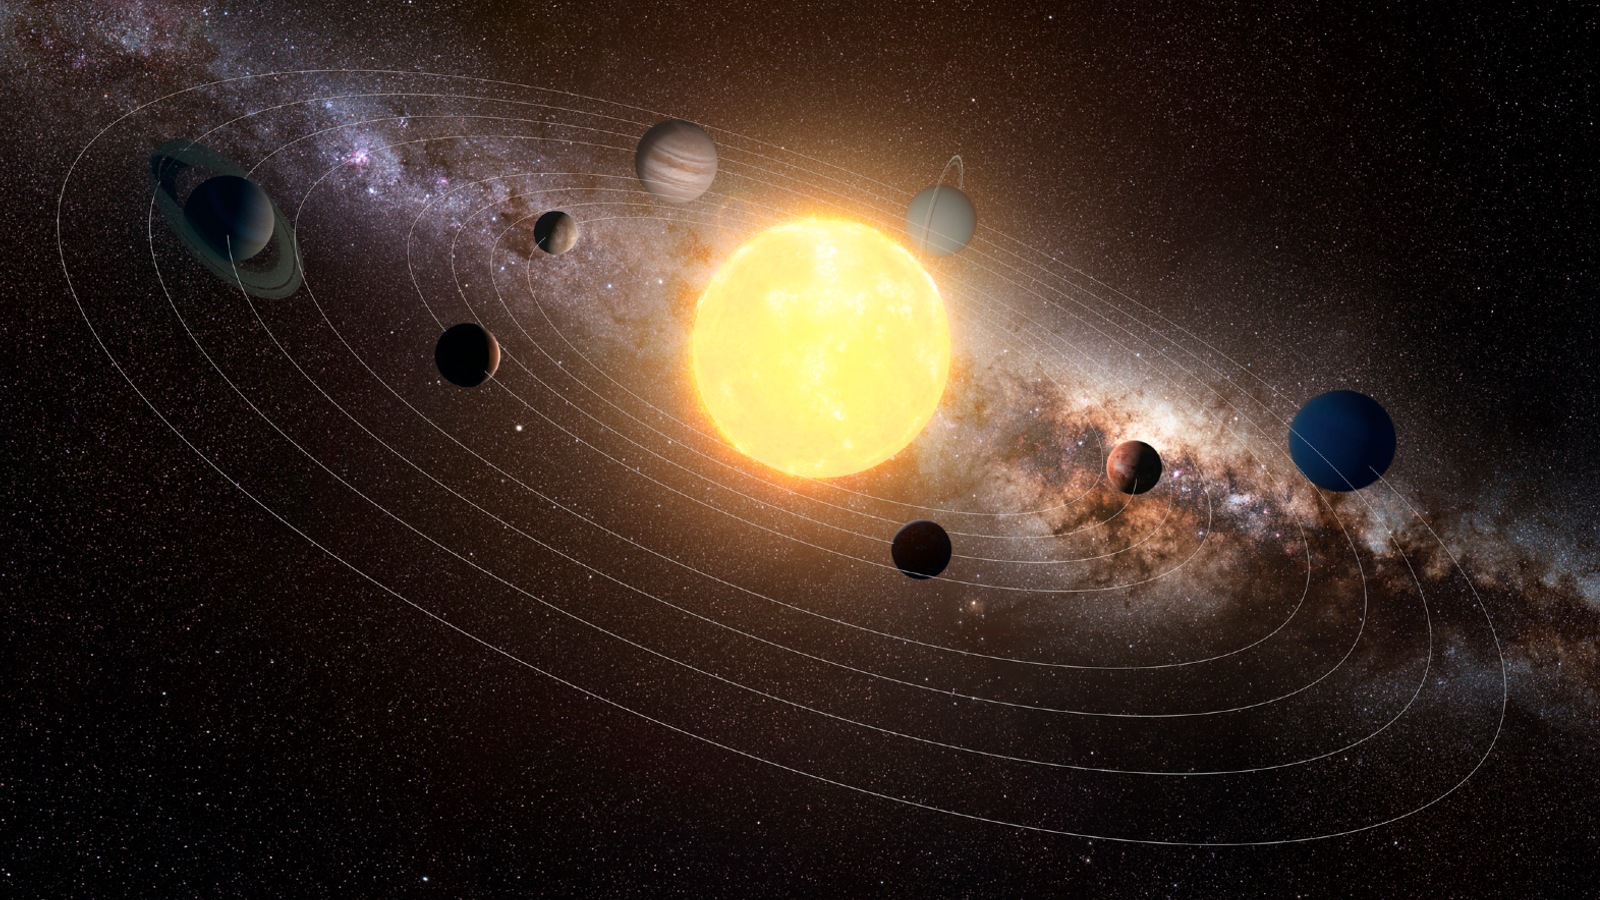 A diagram of the solar system. The sun is surrounded by the eight planets and rings representing their orbits